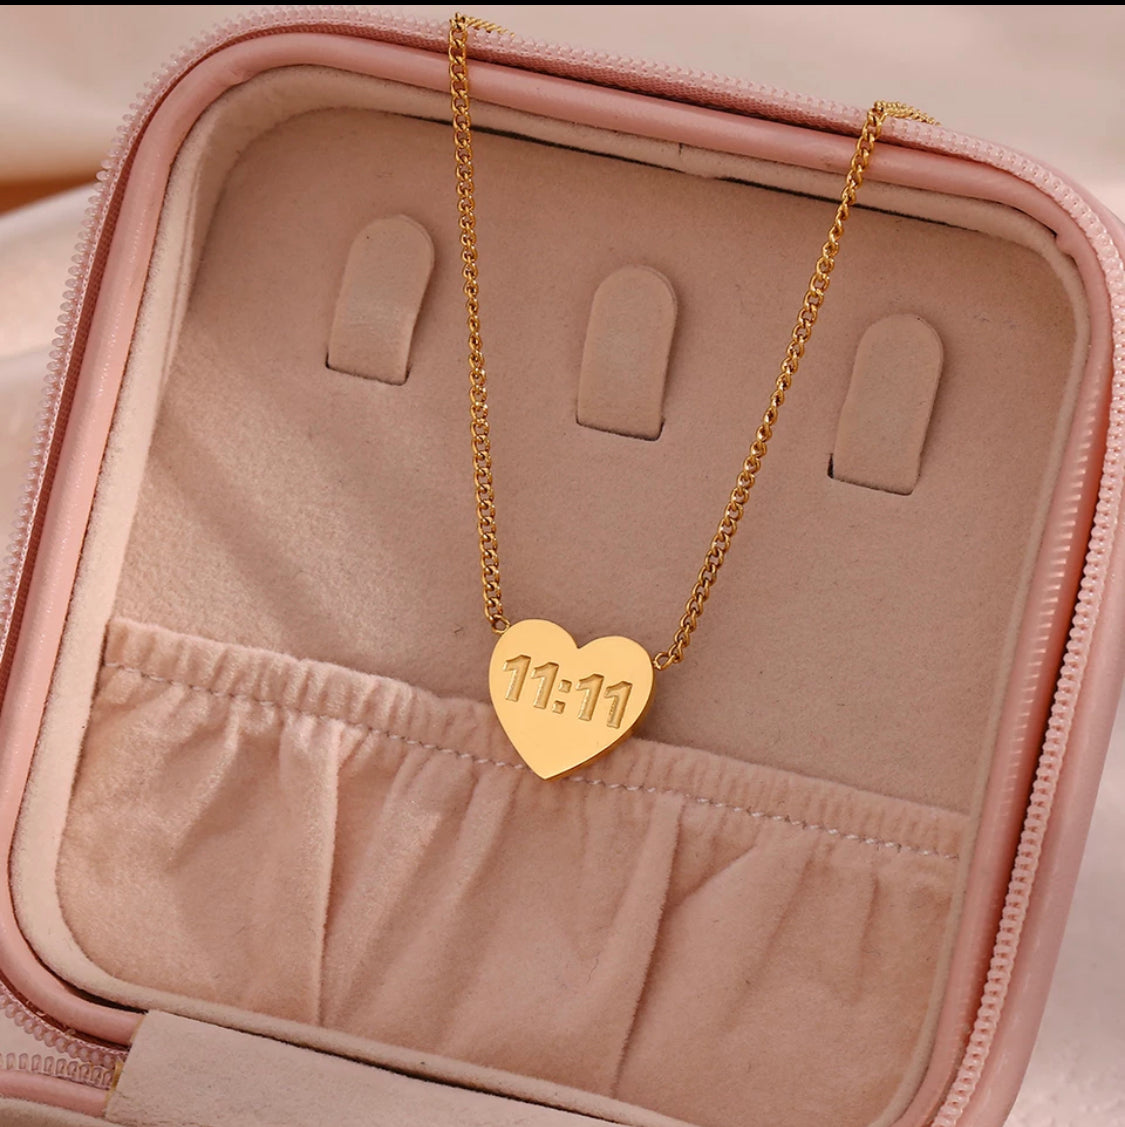 11:11 heart necklace